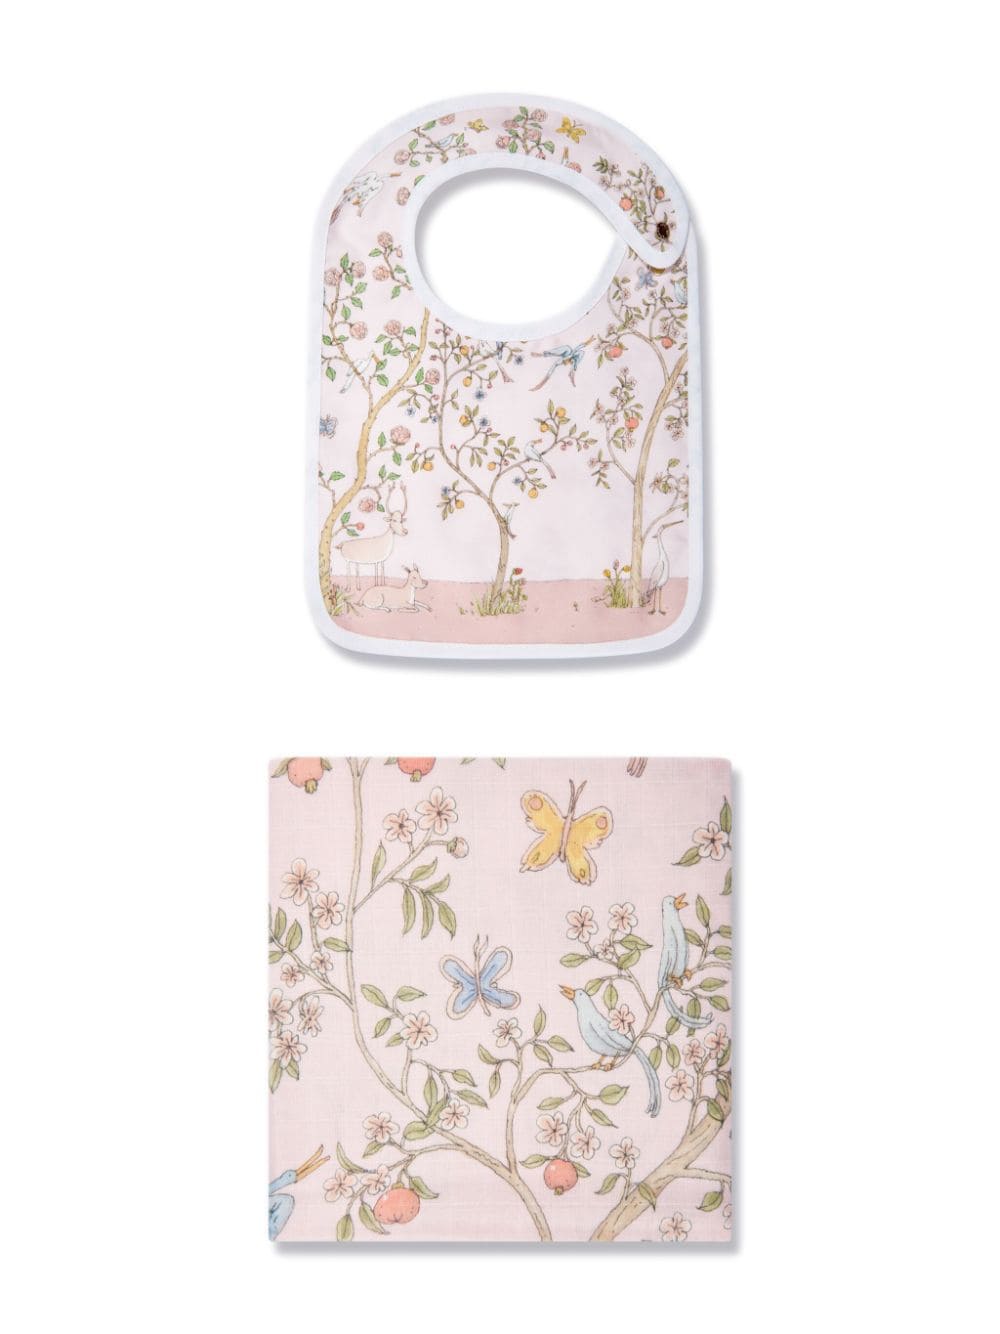 Atelier Choux Carré & Satin In Bloom bib set (set of two) - Pink